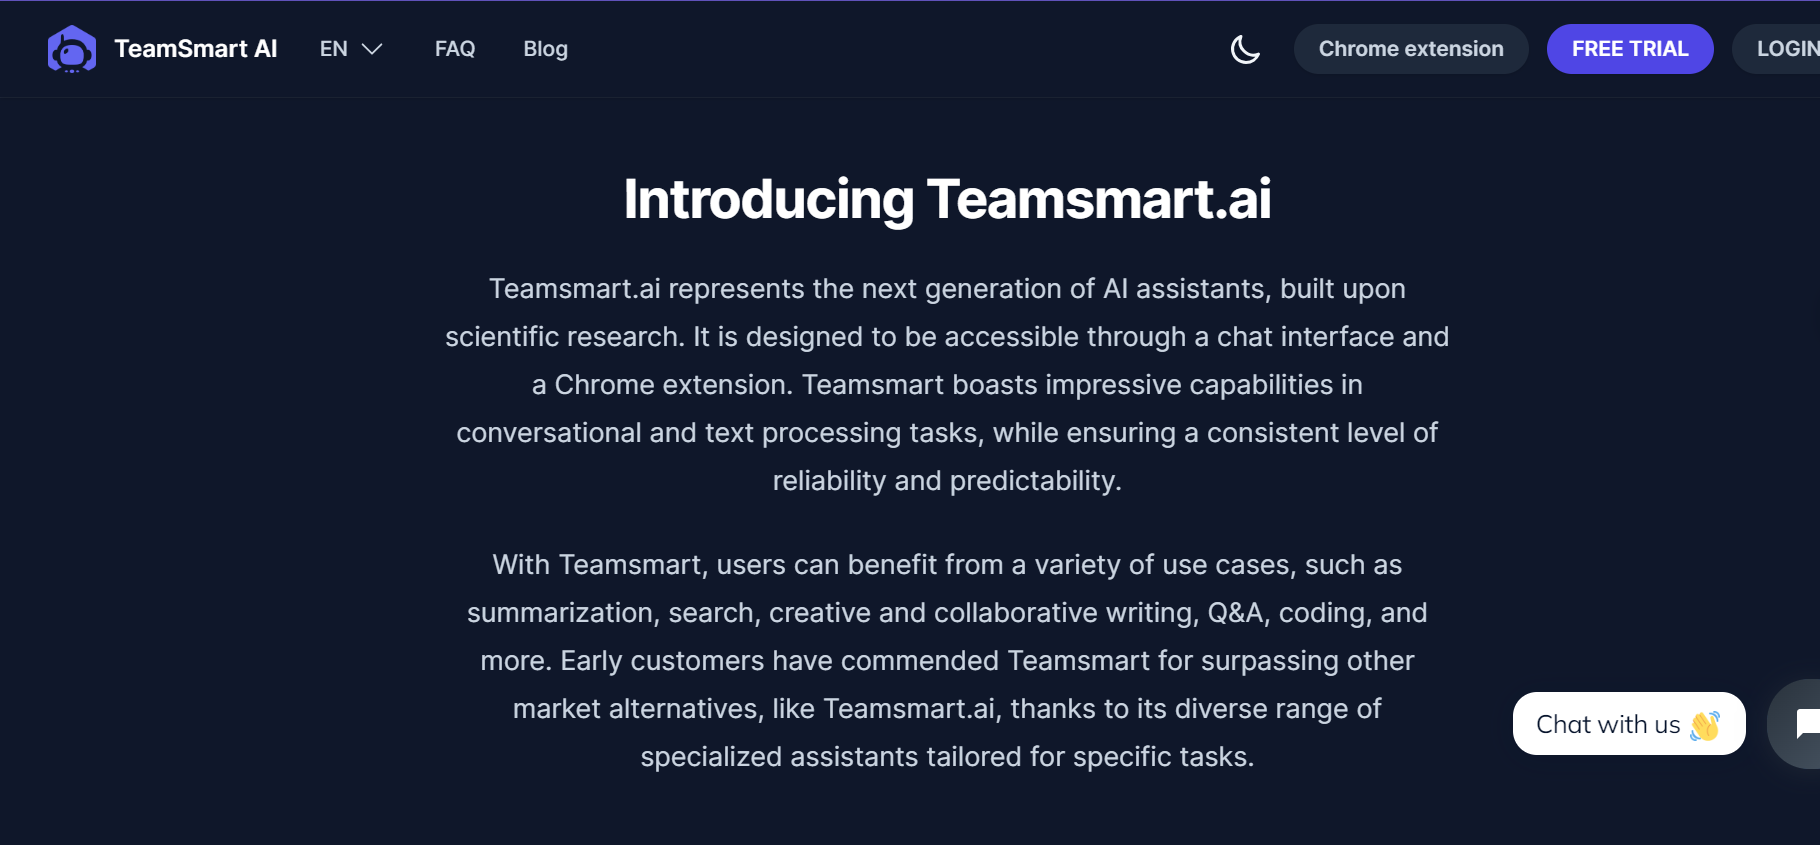 This is an introduction of TeamSmart AI.